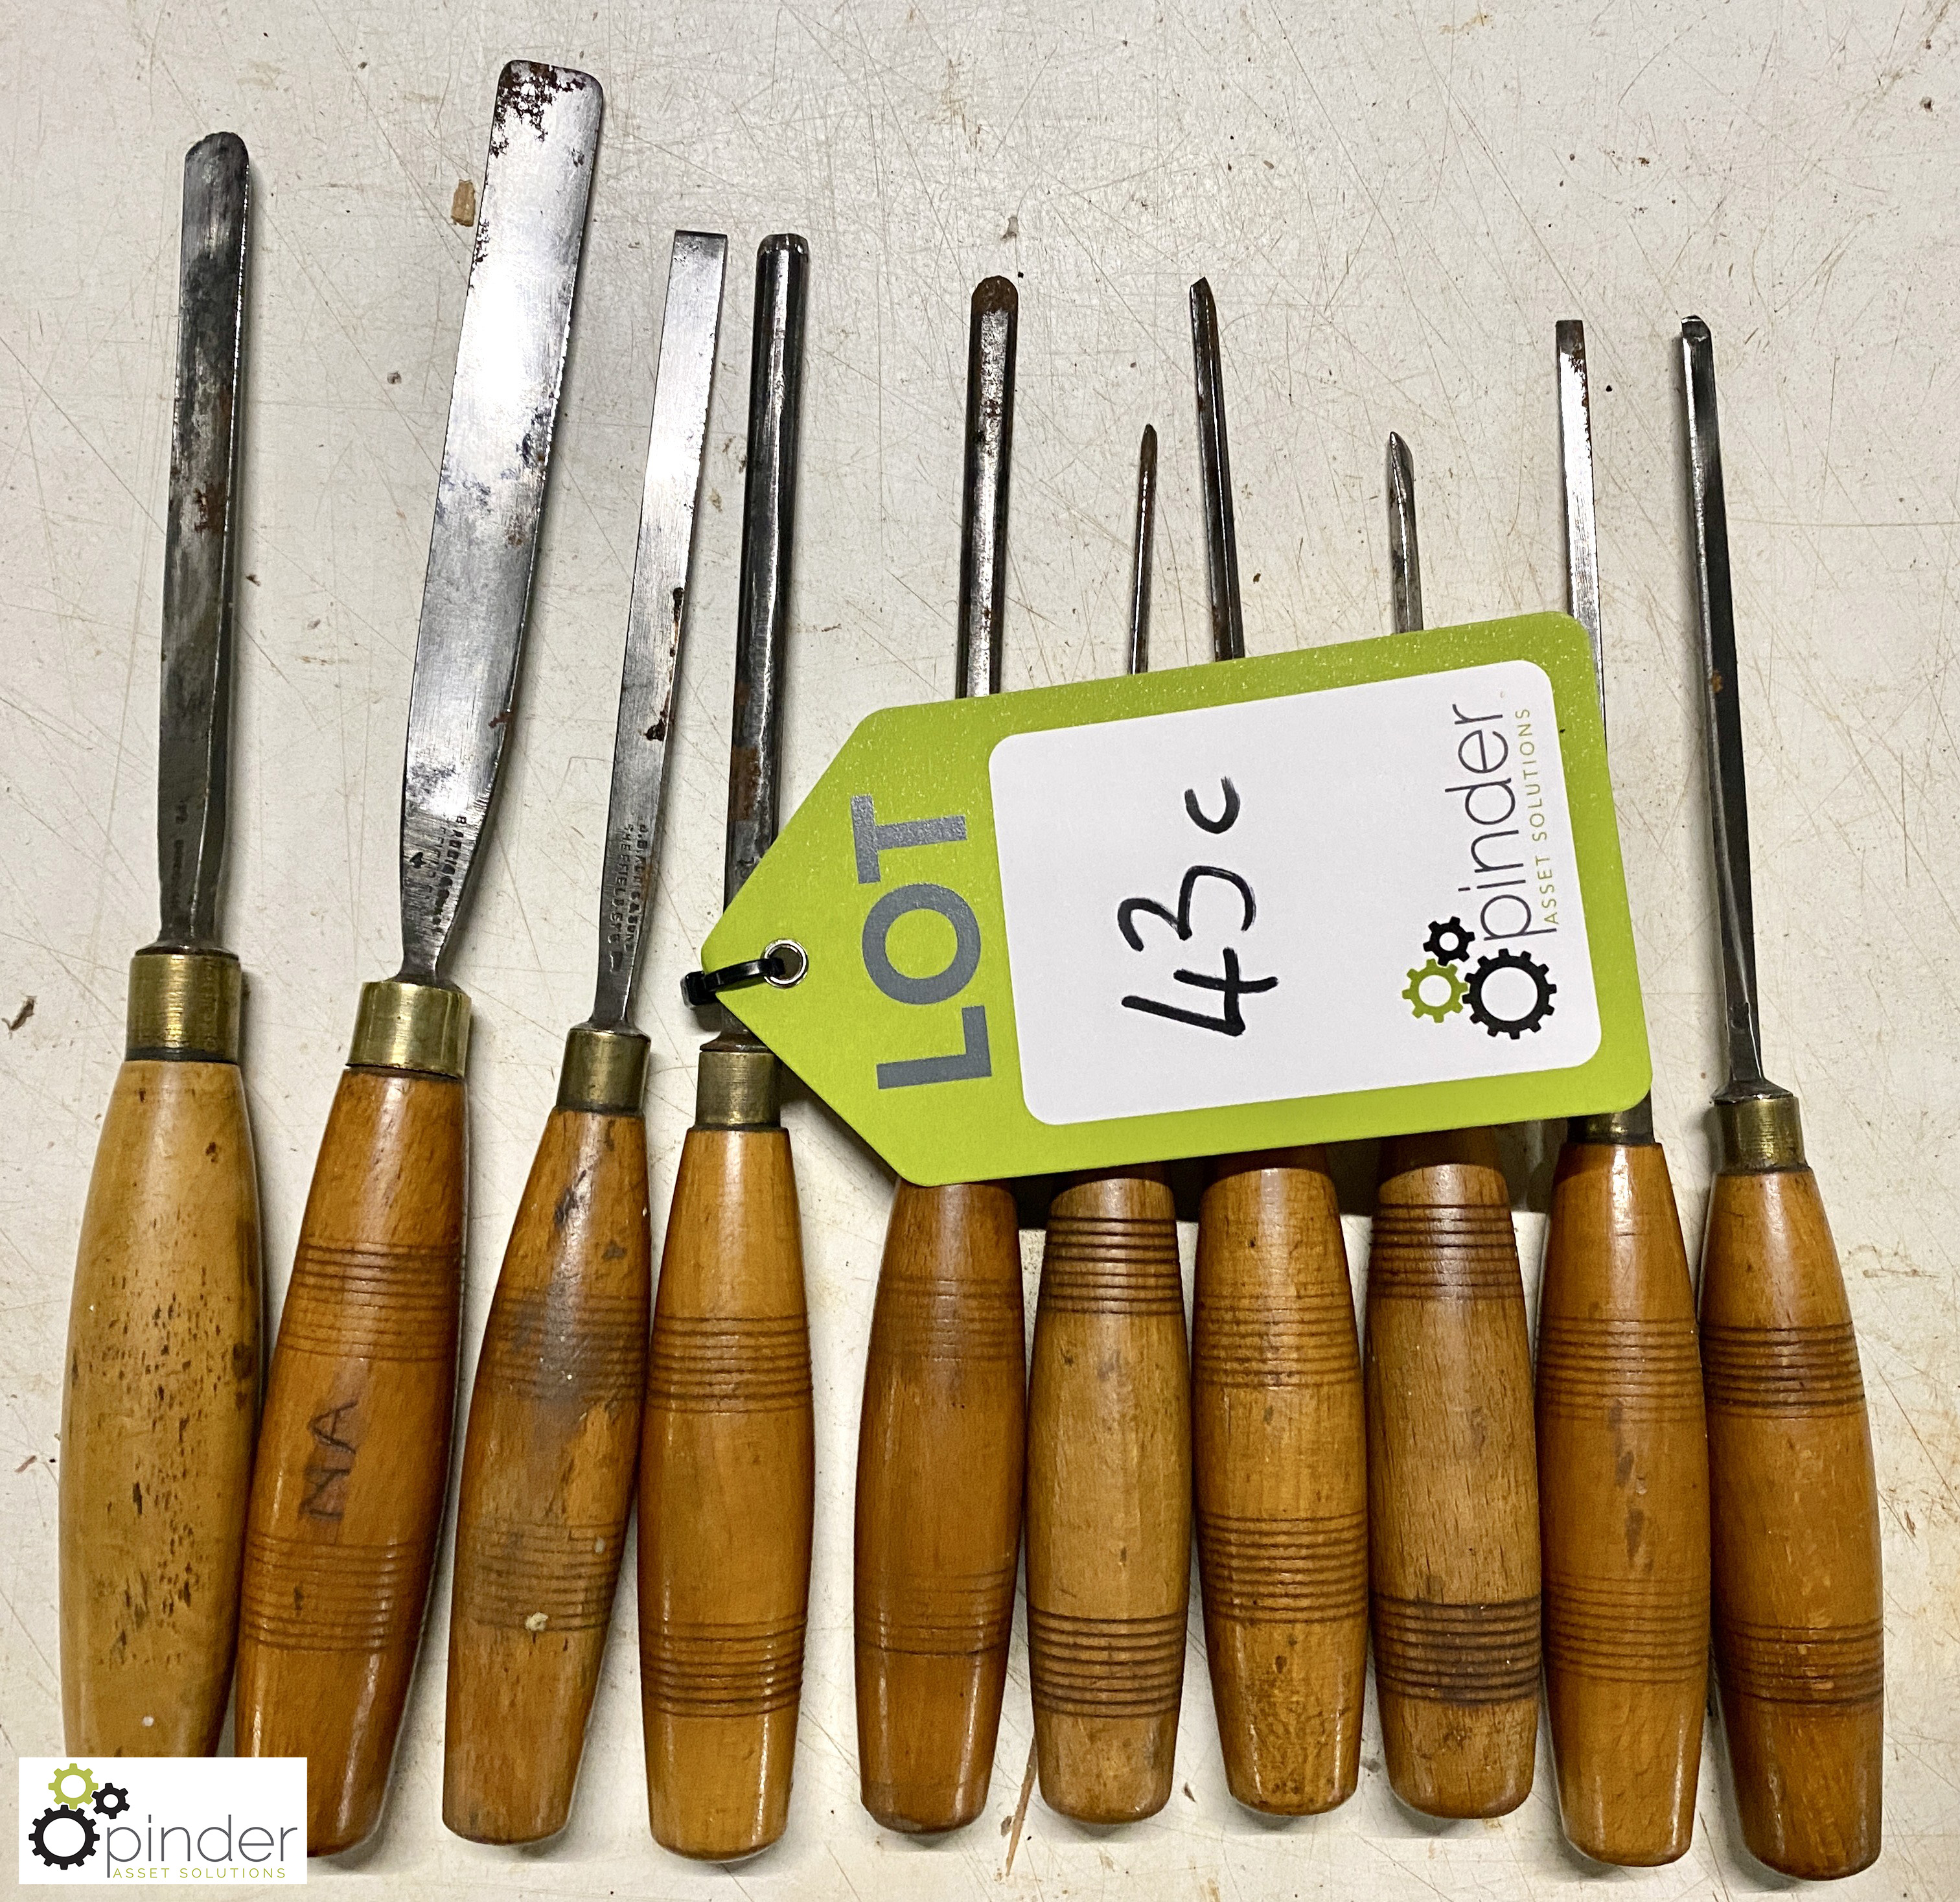 10 various Chisels